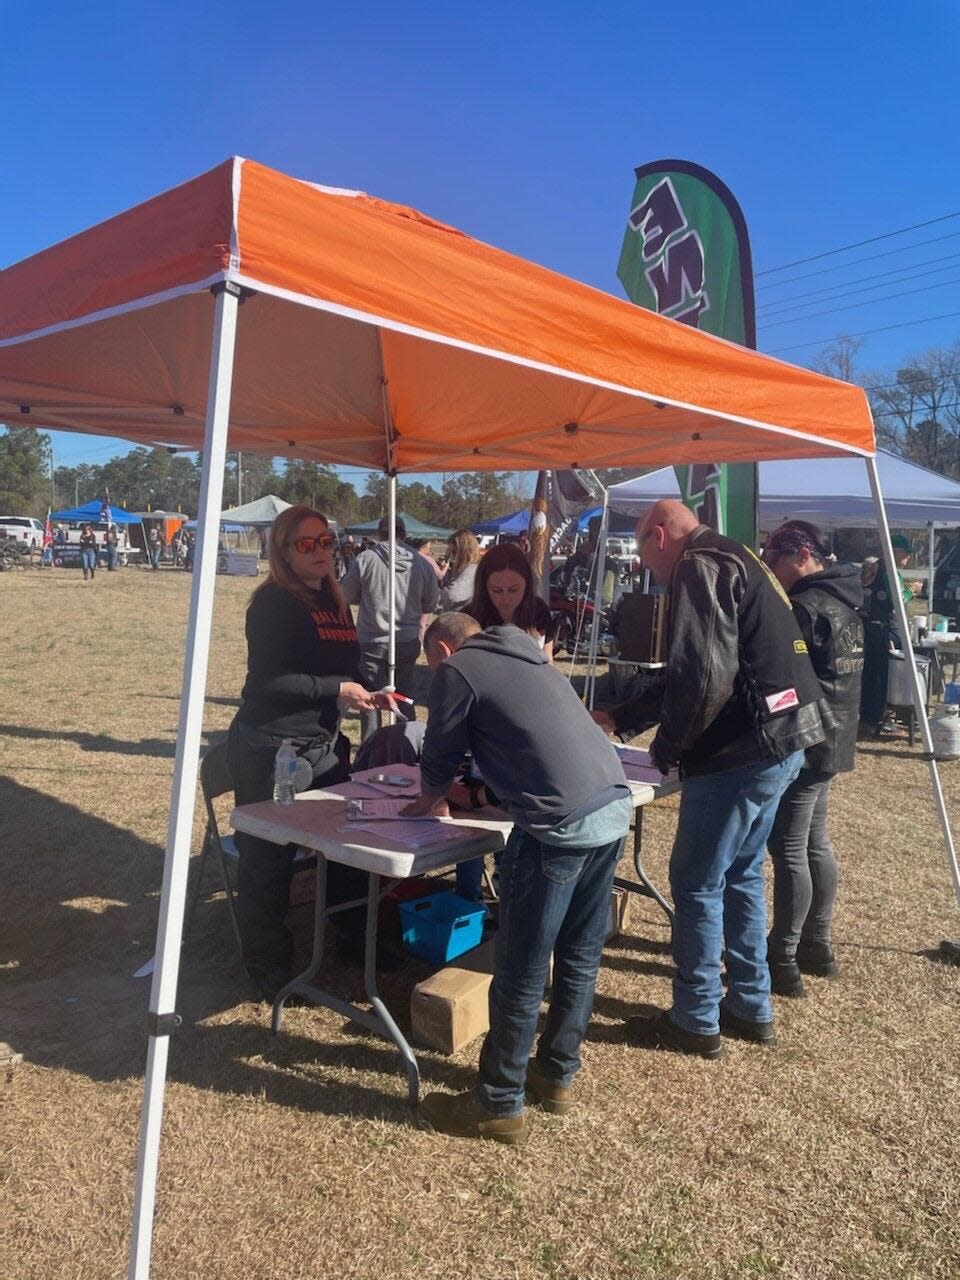 The 16th annual Harley Davidson chili cook-off took place over the weekend.